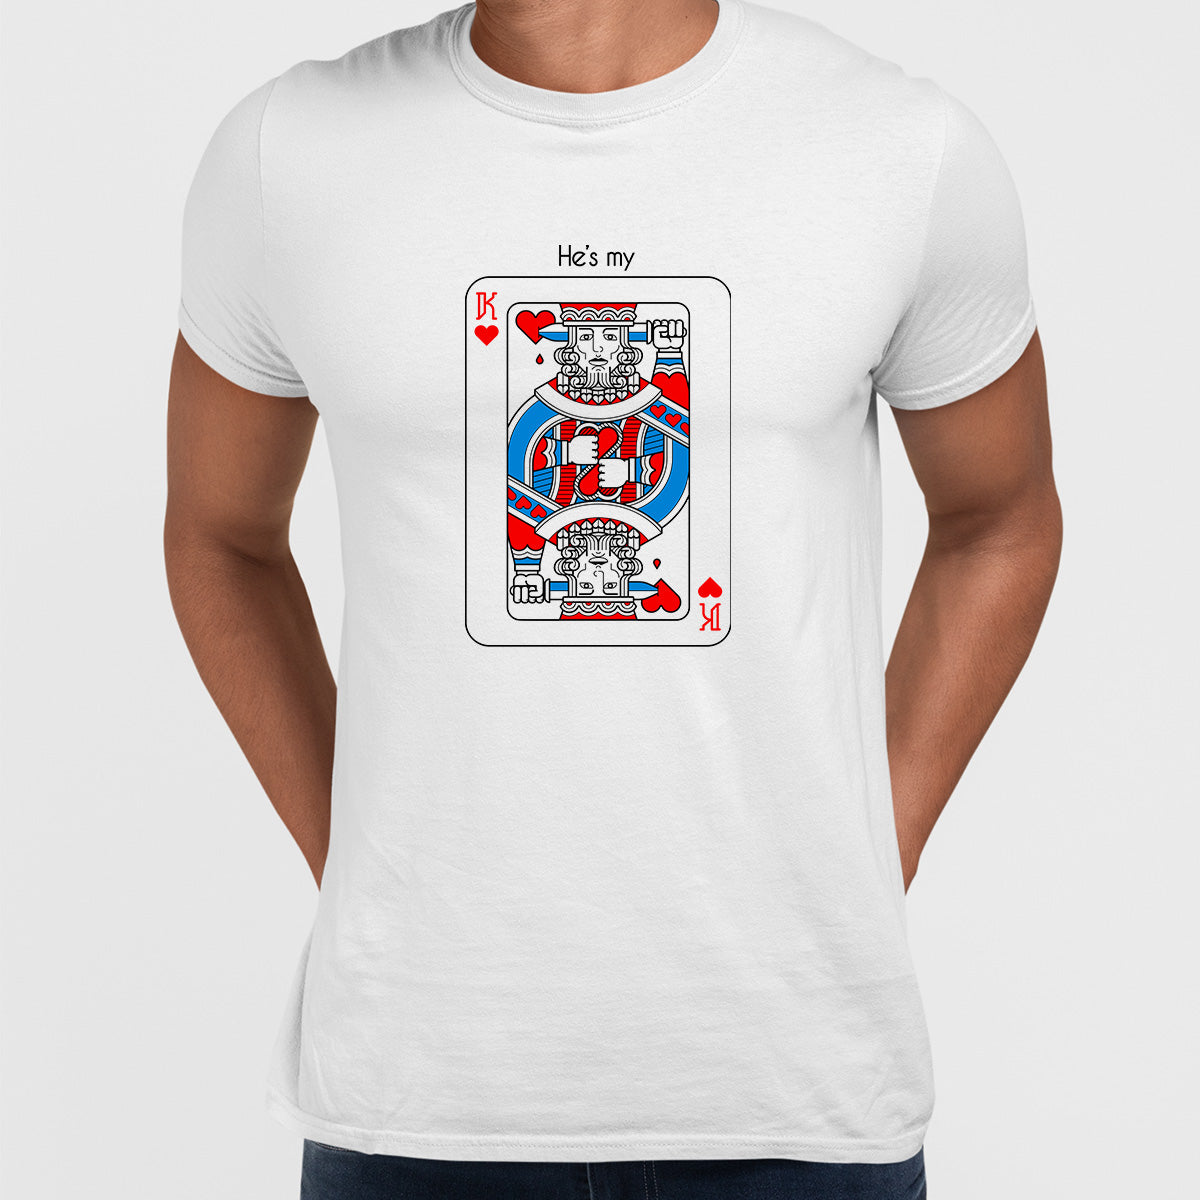 The King Playing Cards Valentine Tees edition - Kuzi Tees